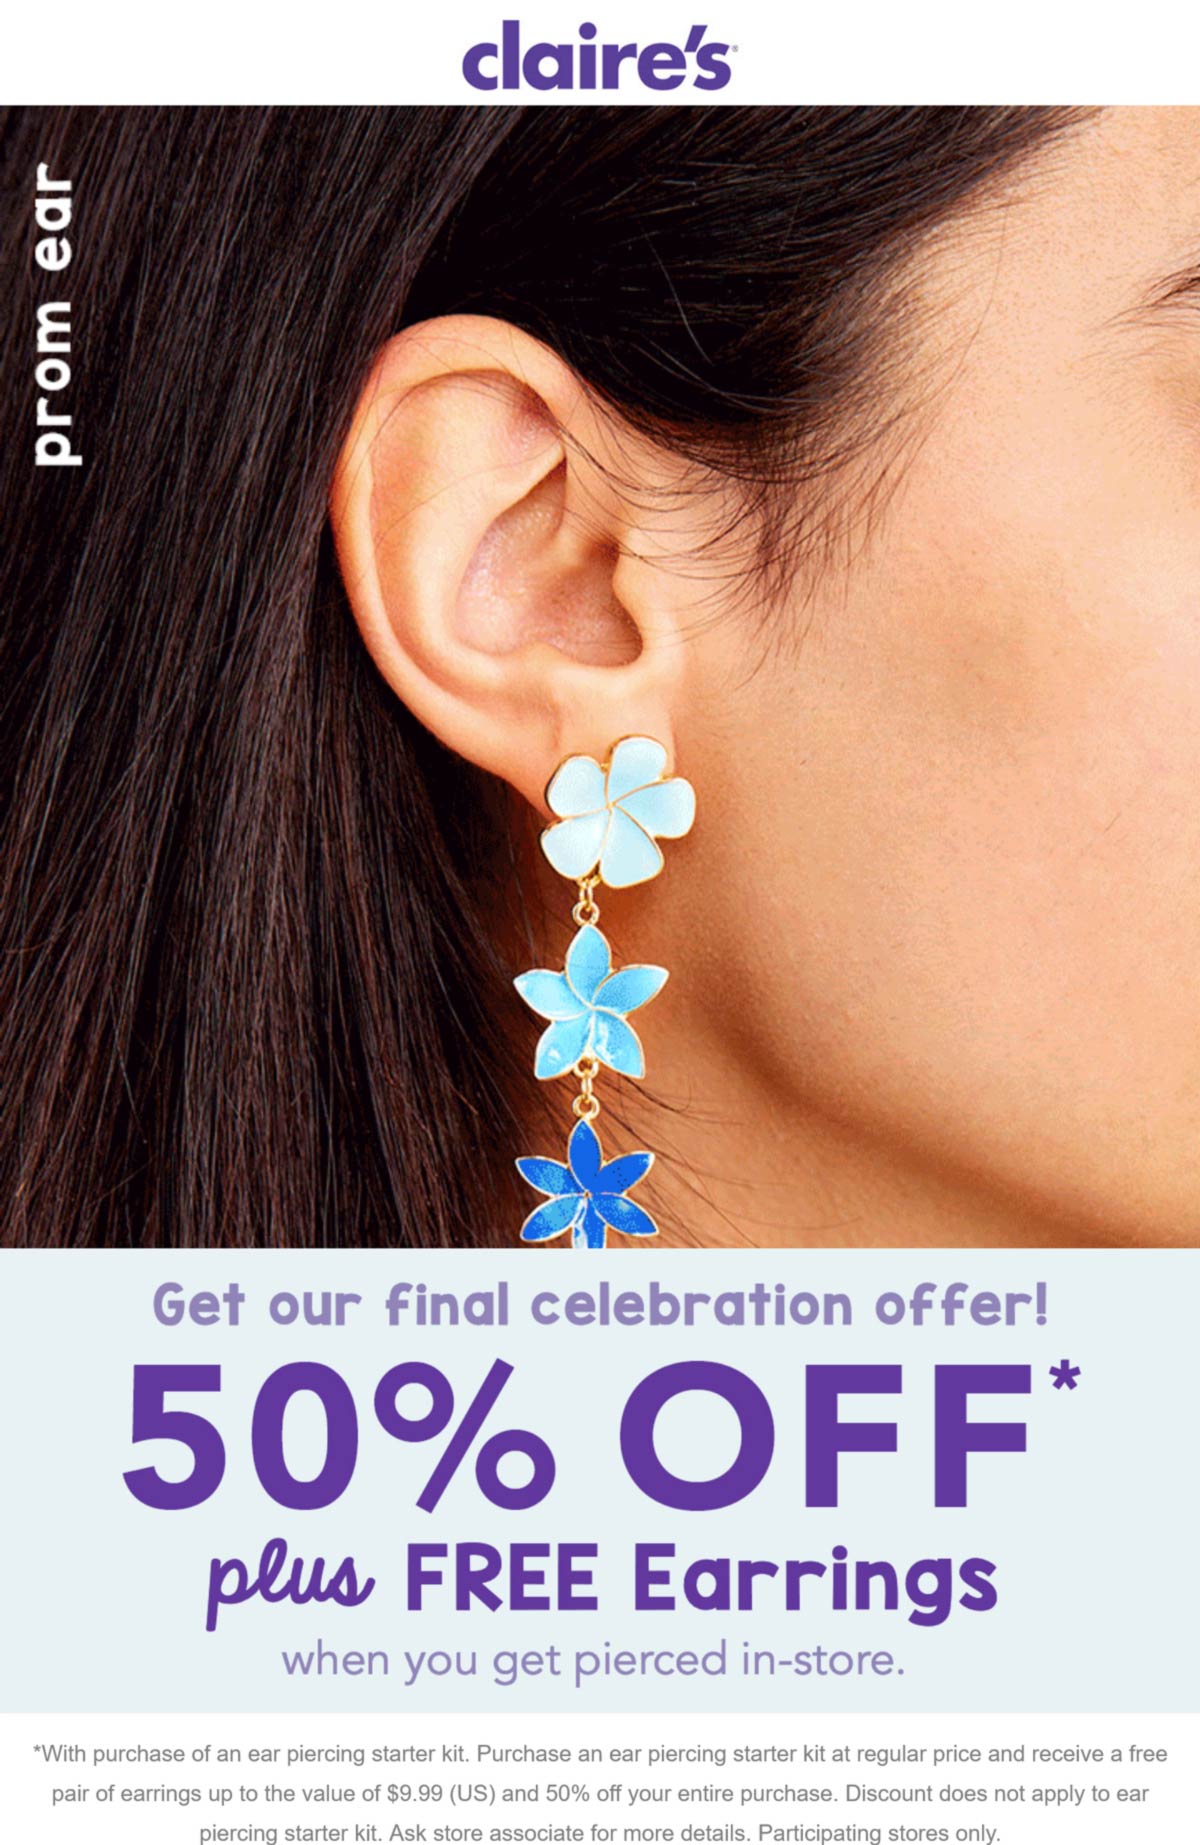 [August, 2021] 50 off + free earrings with your piercing today at